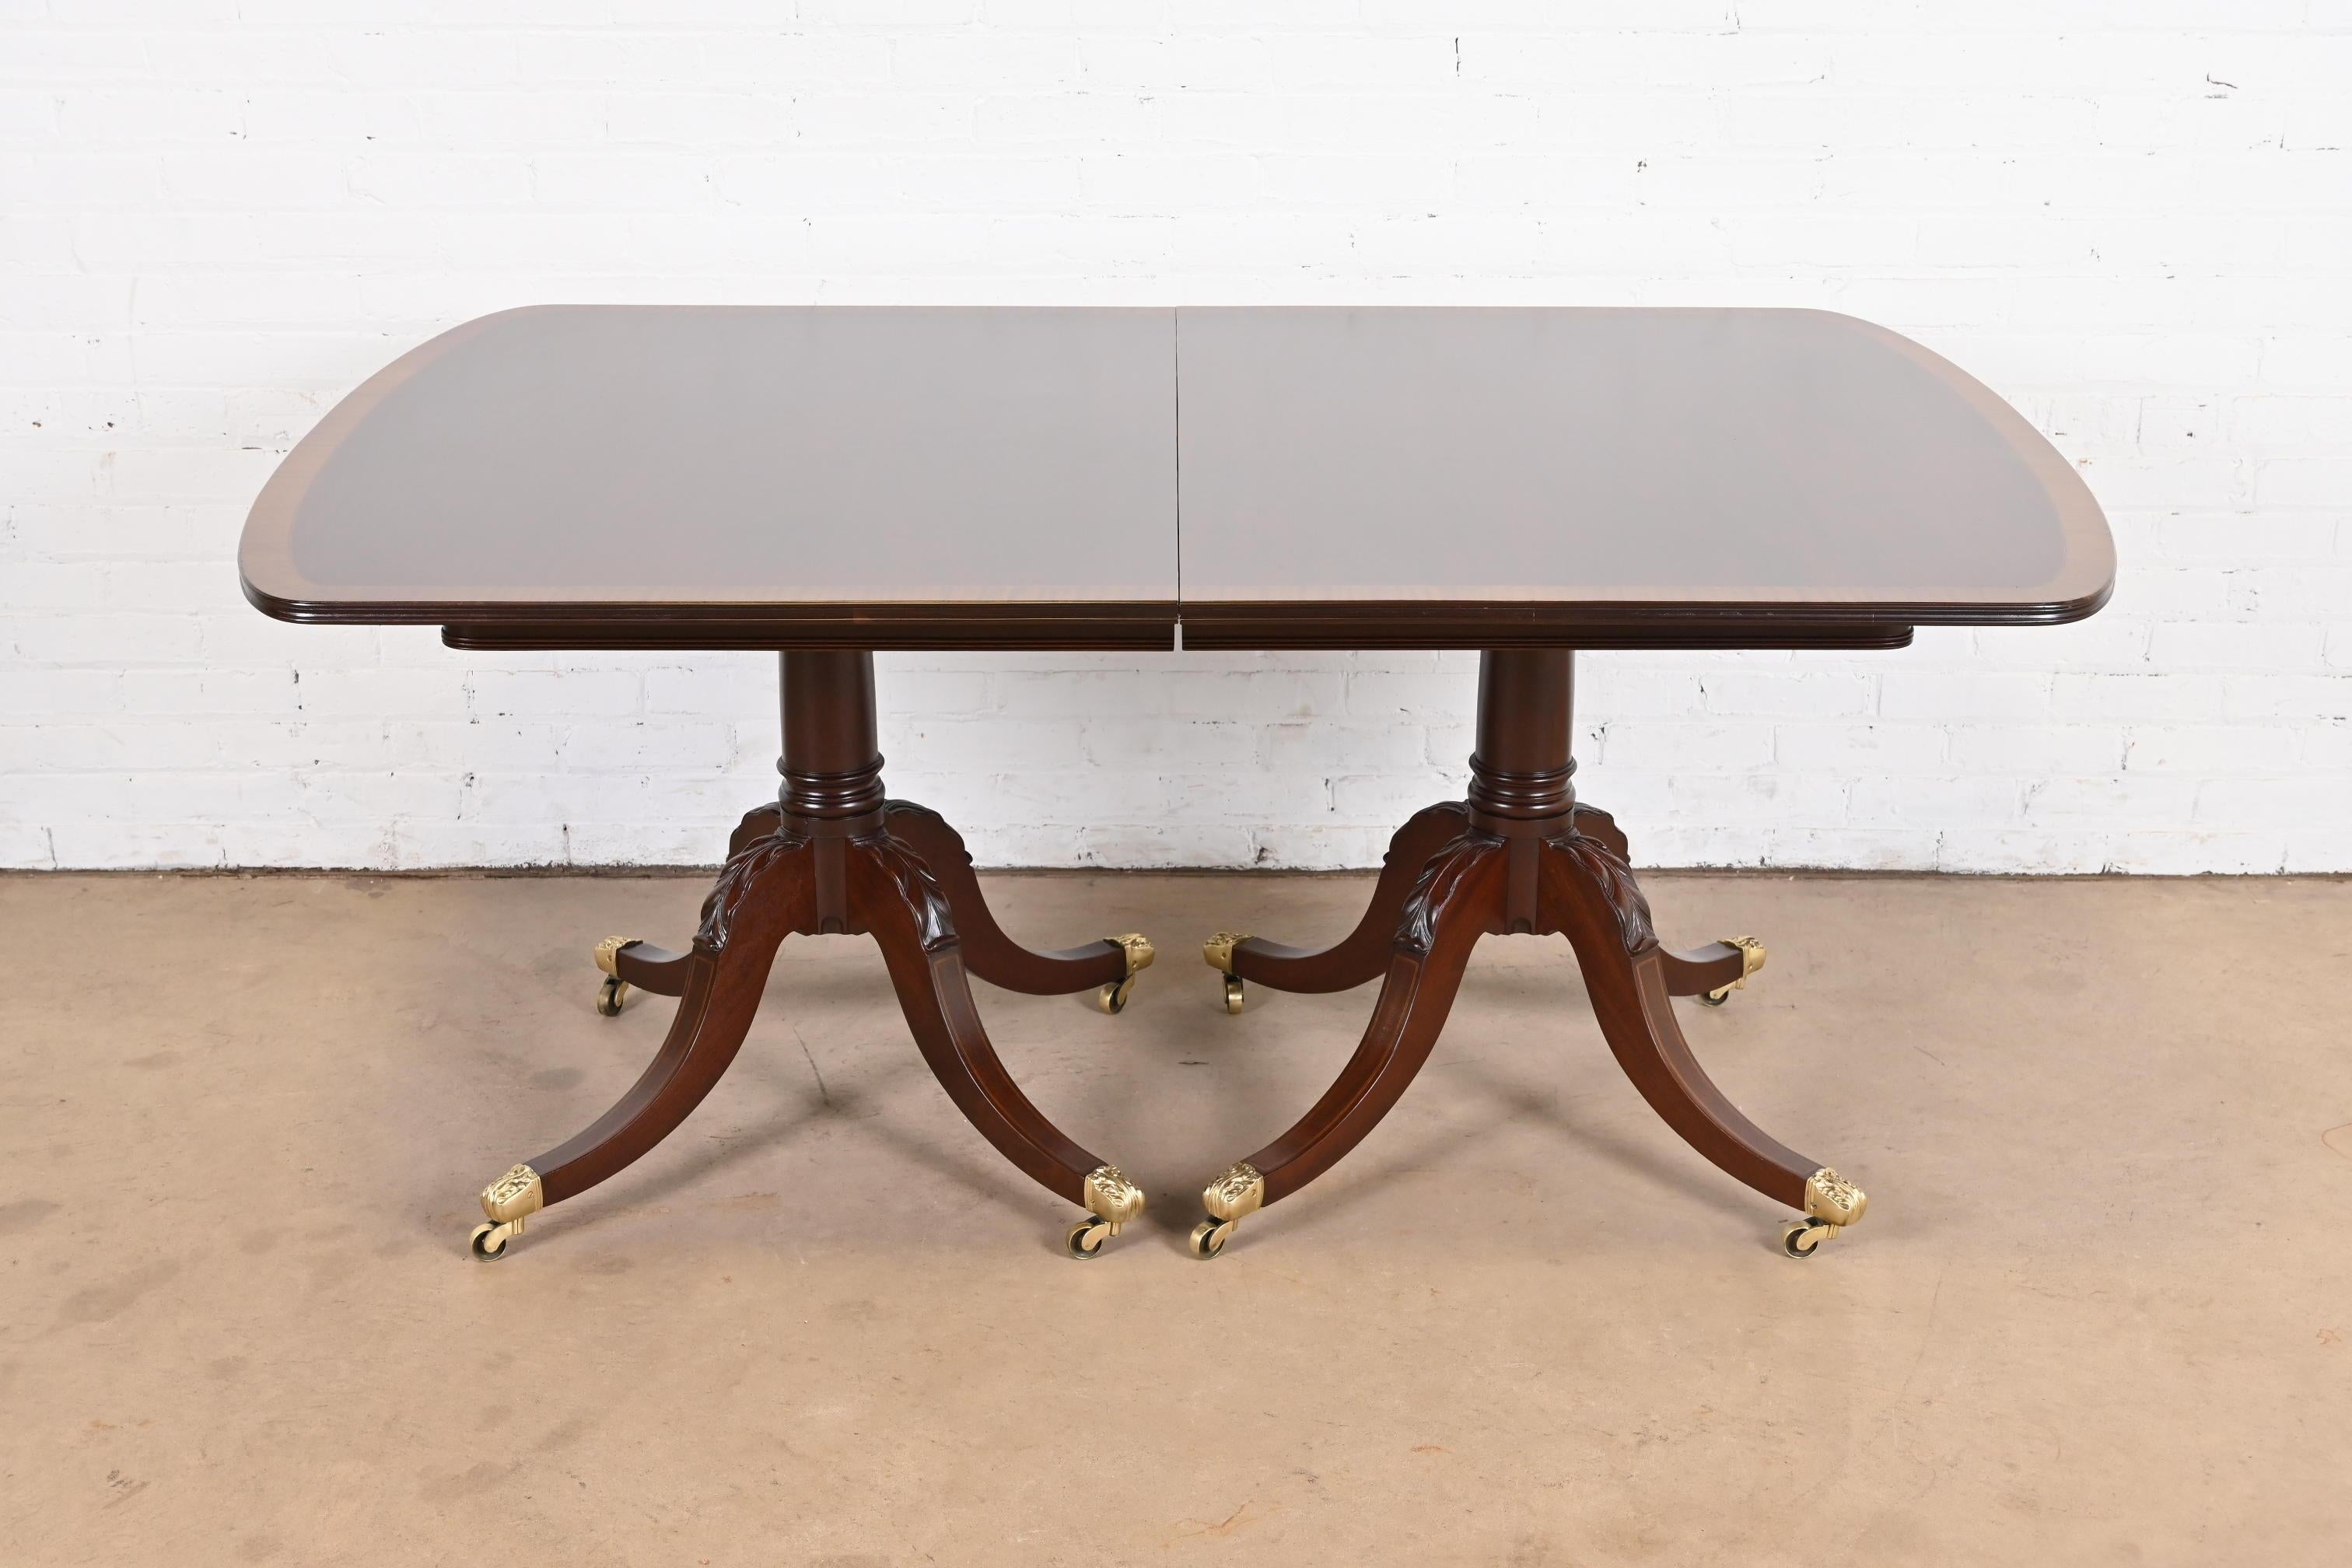 Baker Furniture Style Georgian Mahogany Double Pedestal Dining Table, Refinished 2